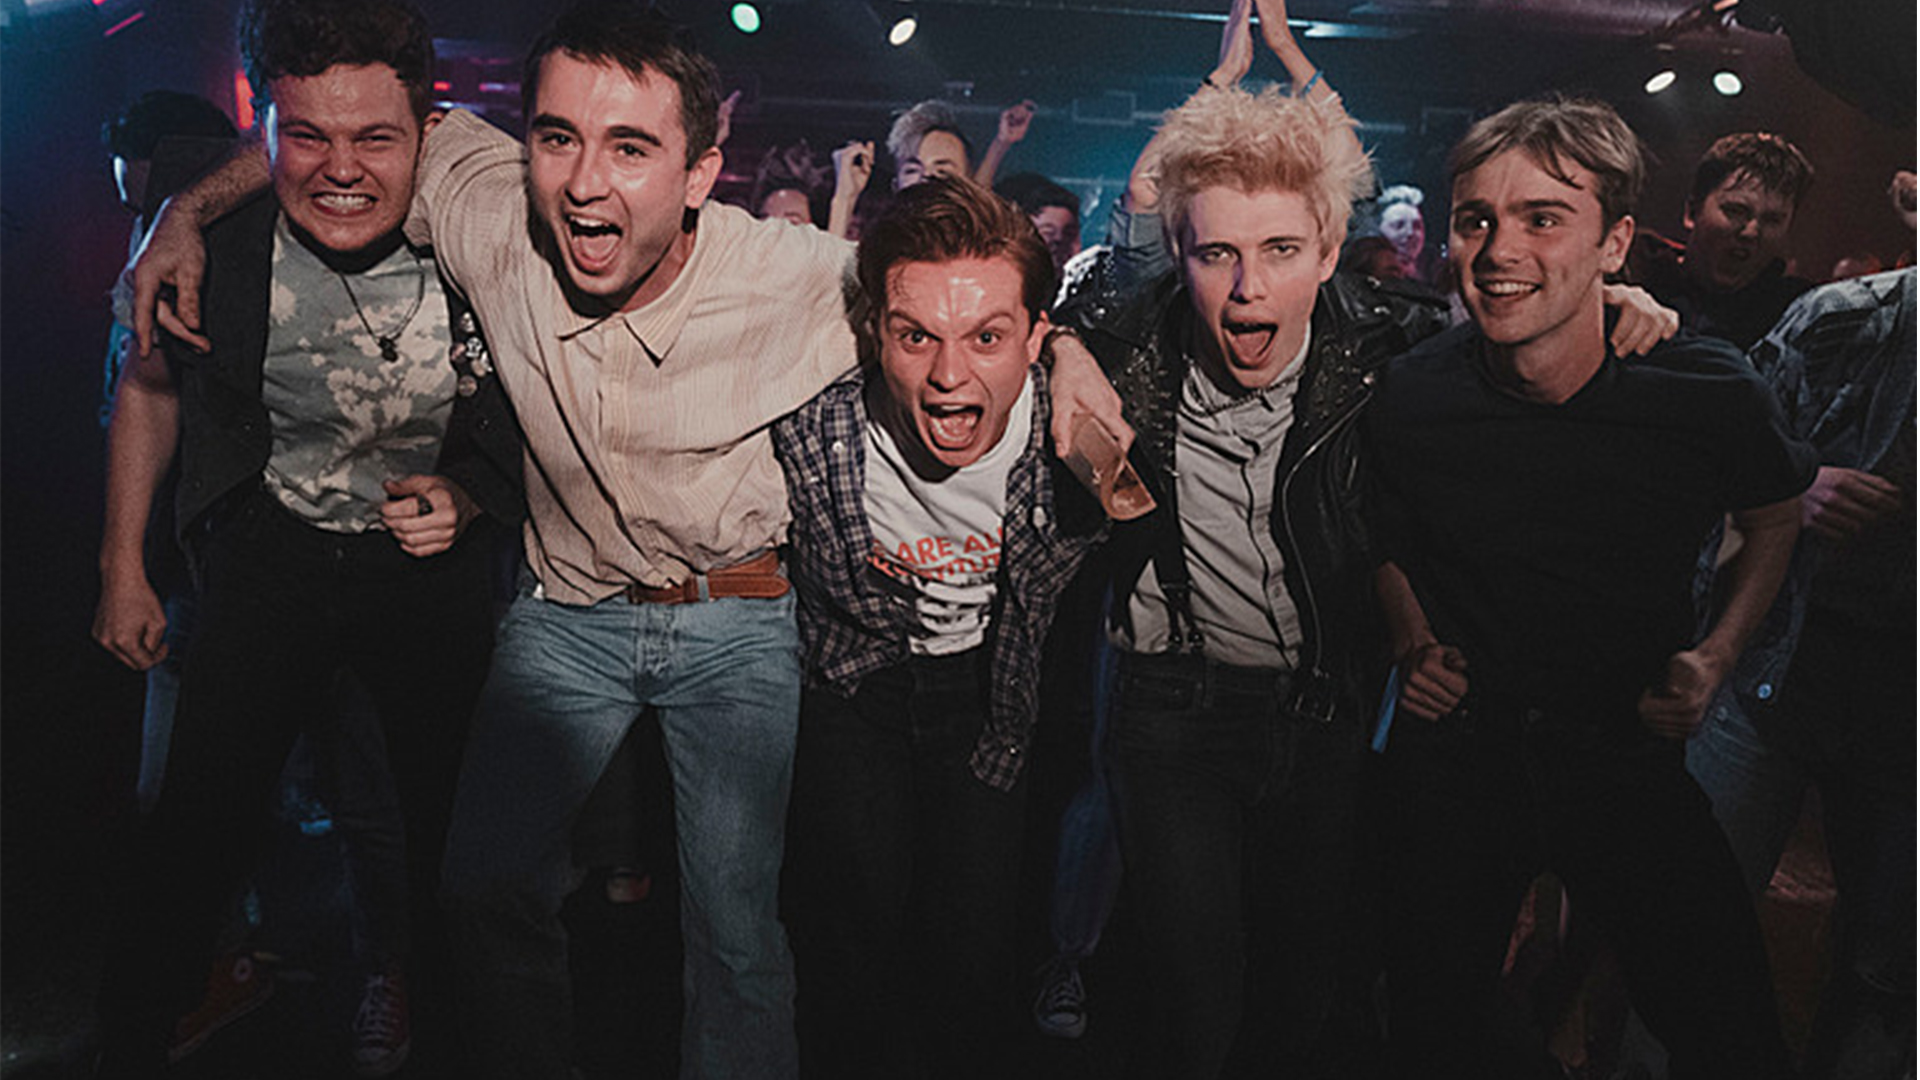 The young cast – Limbo (Matt Littleson), Young Jimmy (Rian Gordon), Young Tully (Tom Glynn-Carney), Young Hogg (Paul Gorman) and Young Tibbs (Mitchell Robertson)